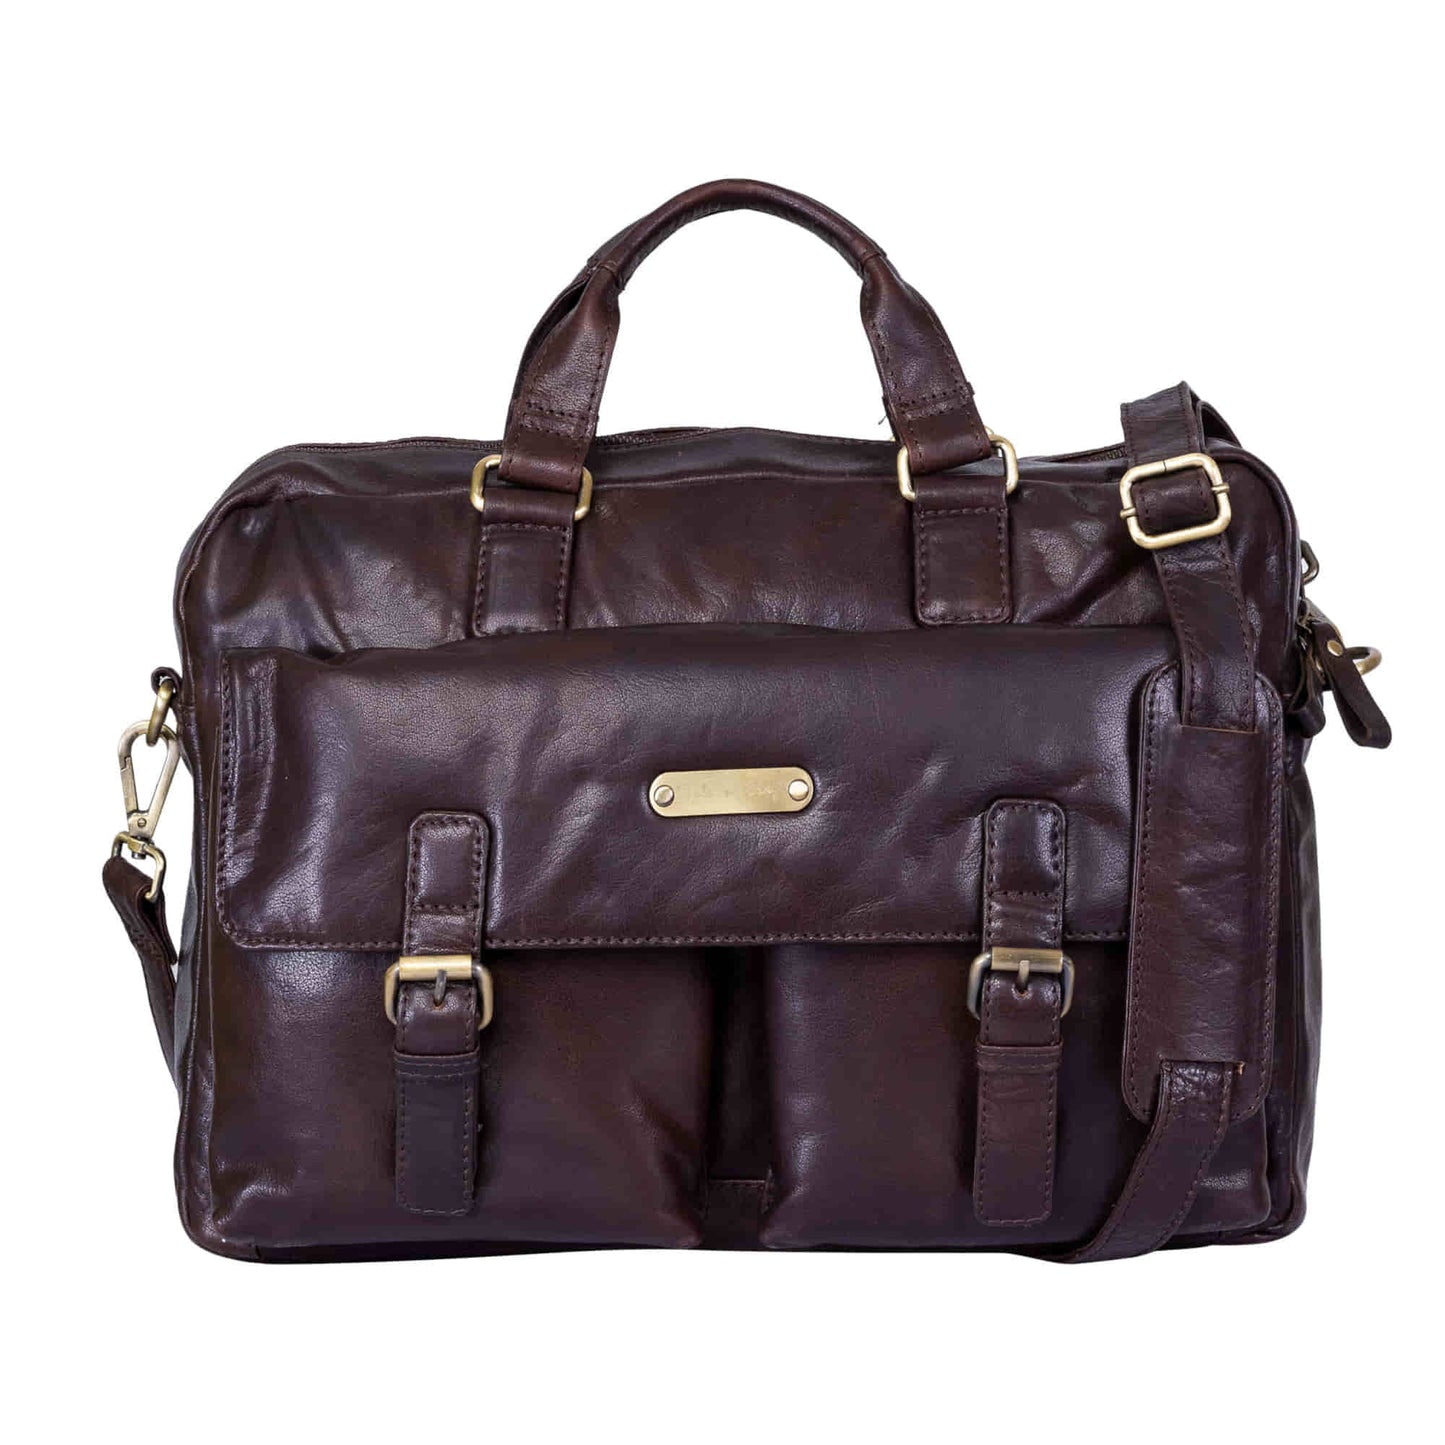 Style n Craft 392500 Cross Body Messenger Bag in Full Grain Dark Brown Vintage Leather - Front View showing the top leather handles, the front single leather flap for the 2 smaller front pockets & the leather shoulder strap with a sliding leather shoulder pad